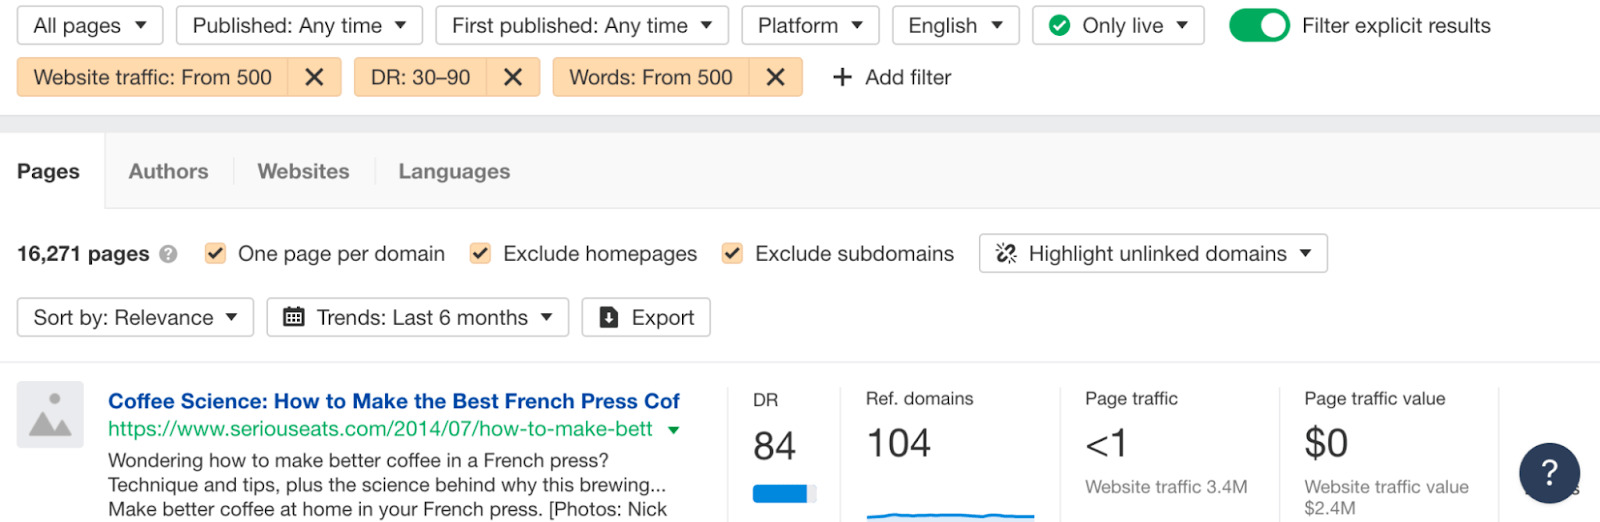 Content Explorer search results with filters applied for "french press"